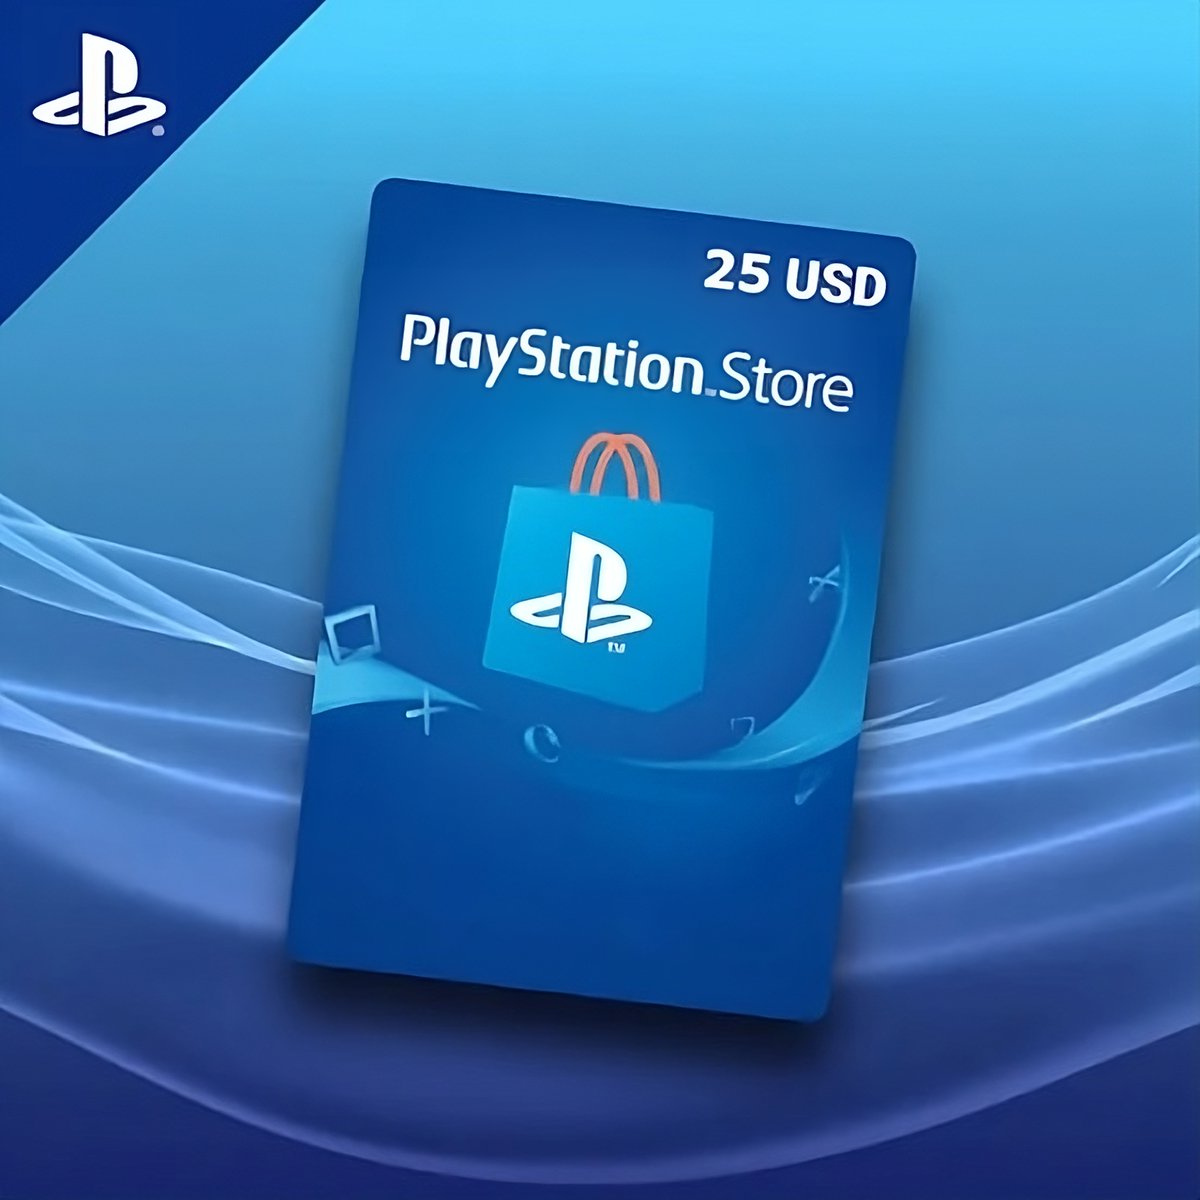 LIGHTNING ROUND GIVEAWAY (48 Hour Giveaway): I'm giving away: ⚫1x $25 Steam Gift Card! ⚫1x $25 PlayStation Store Card! To ENTER: 1️⃣Follow 2️⃣Like & Retweet 3️⃣Comment platform and what you wanna buy! Winners will be announced FRIDAY (May 10th) at 11PM PST #Giveaways